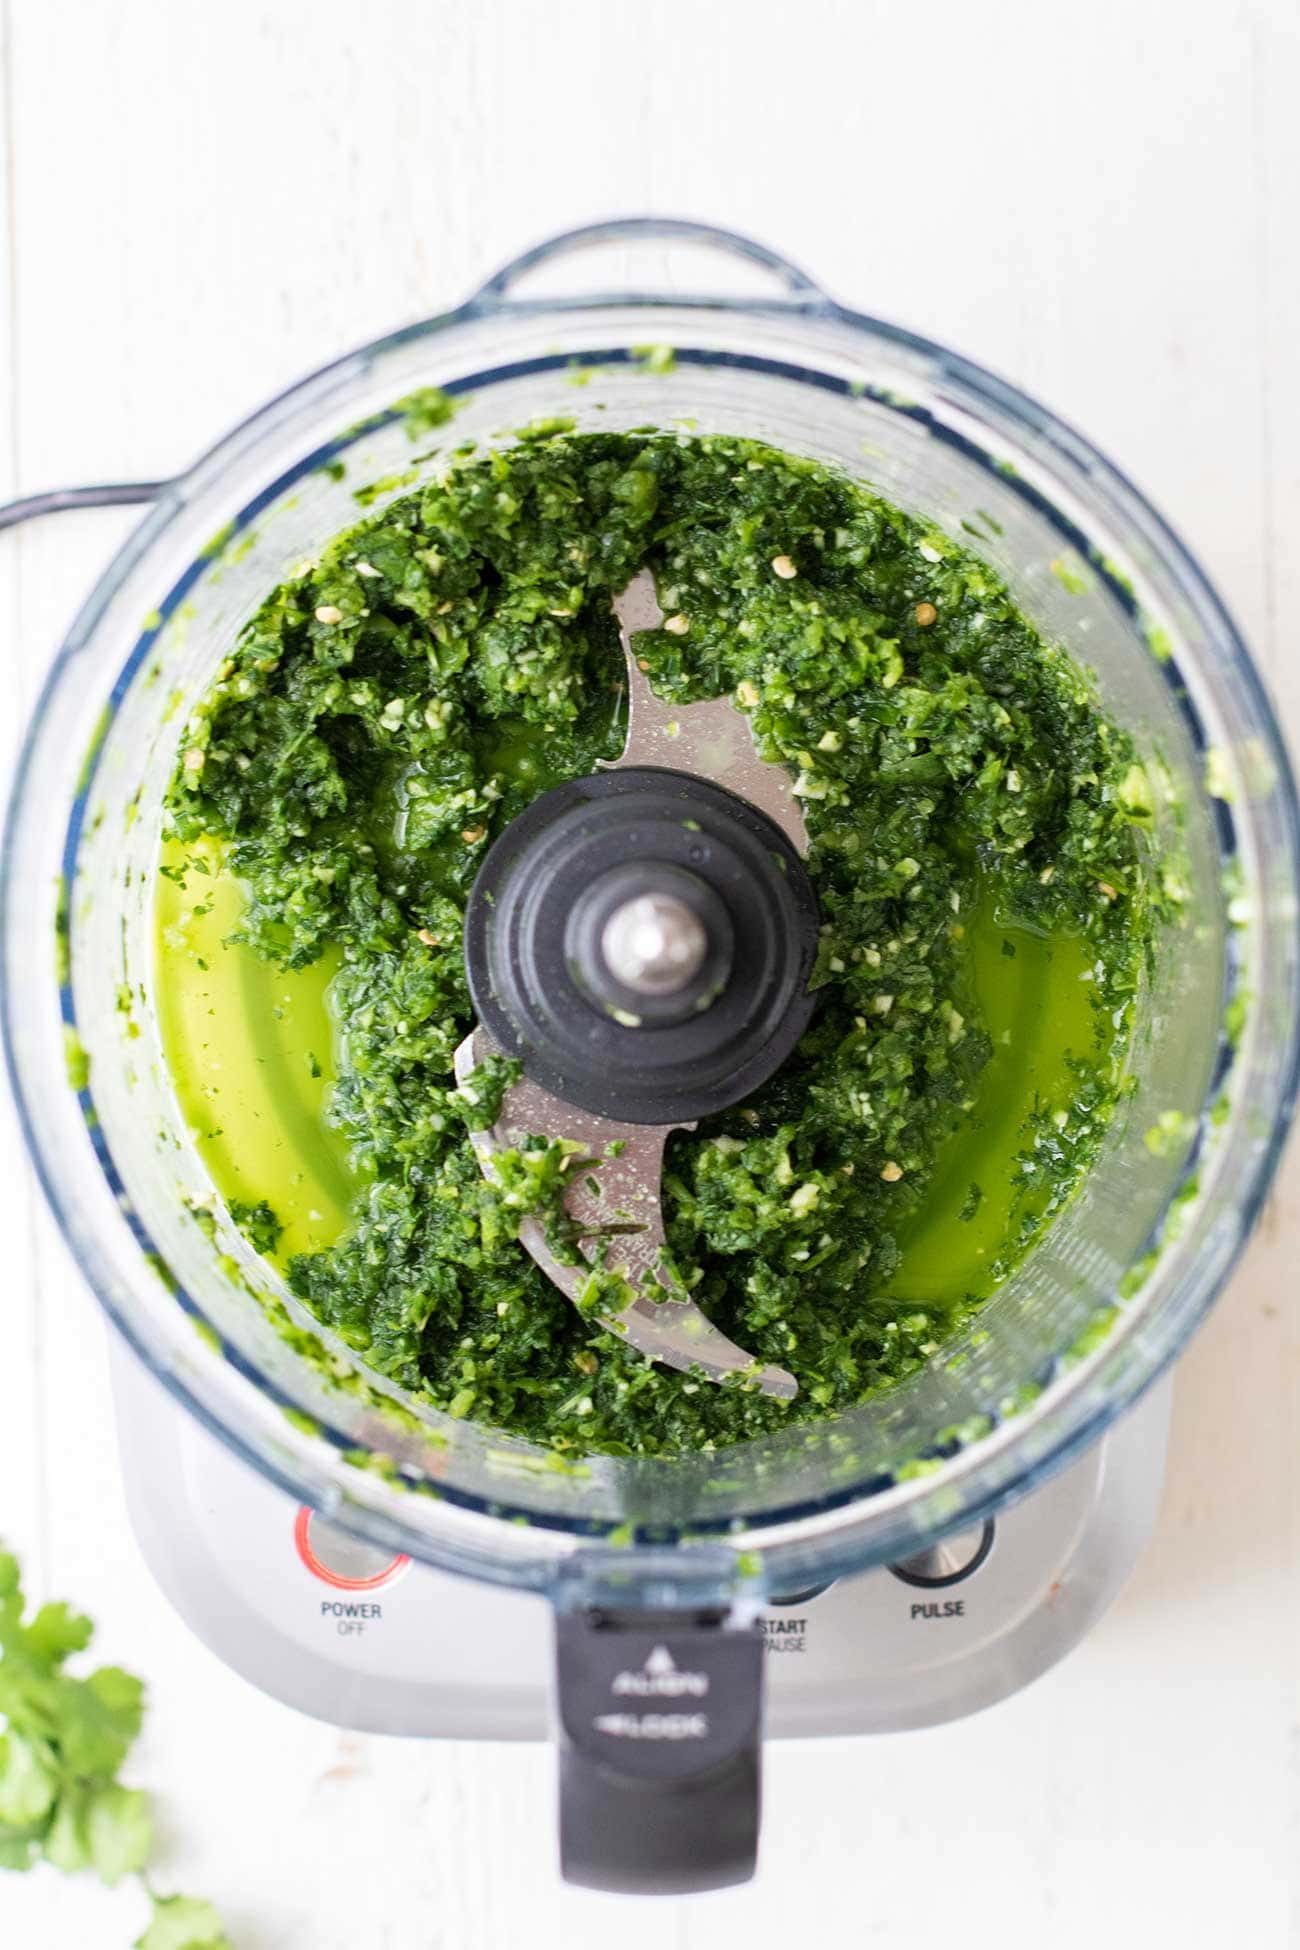 The peppers and cilantro in a food processor shown chopped.